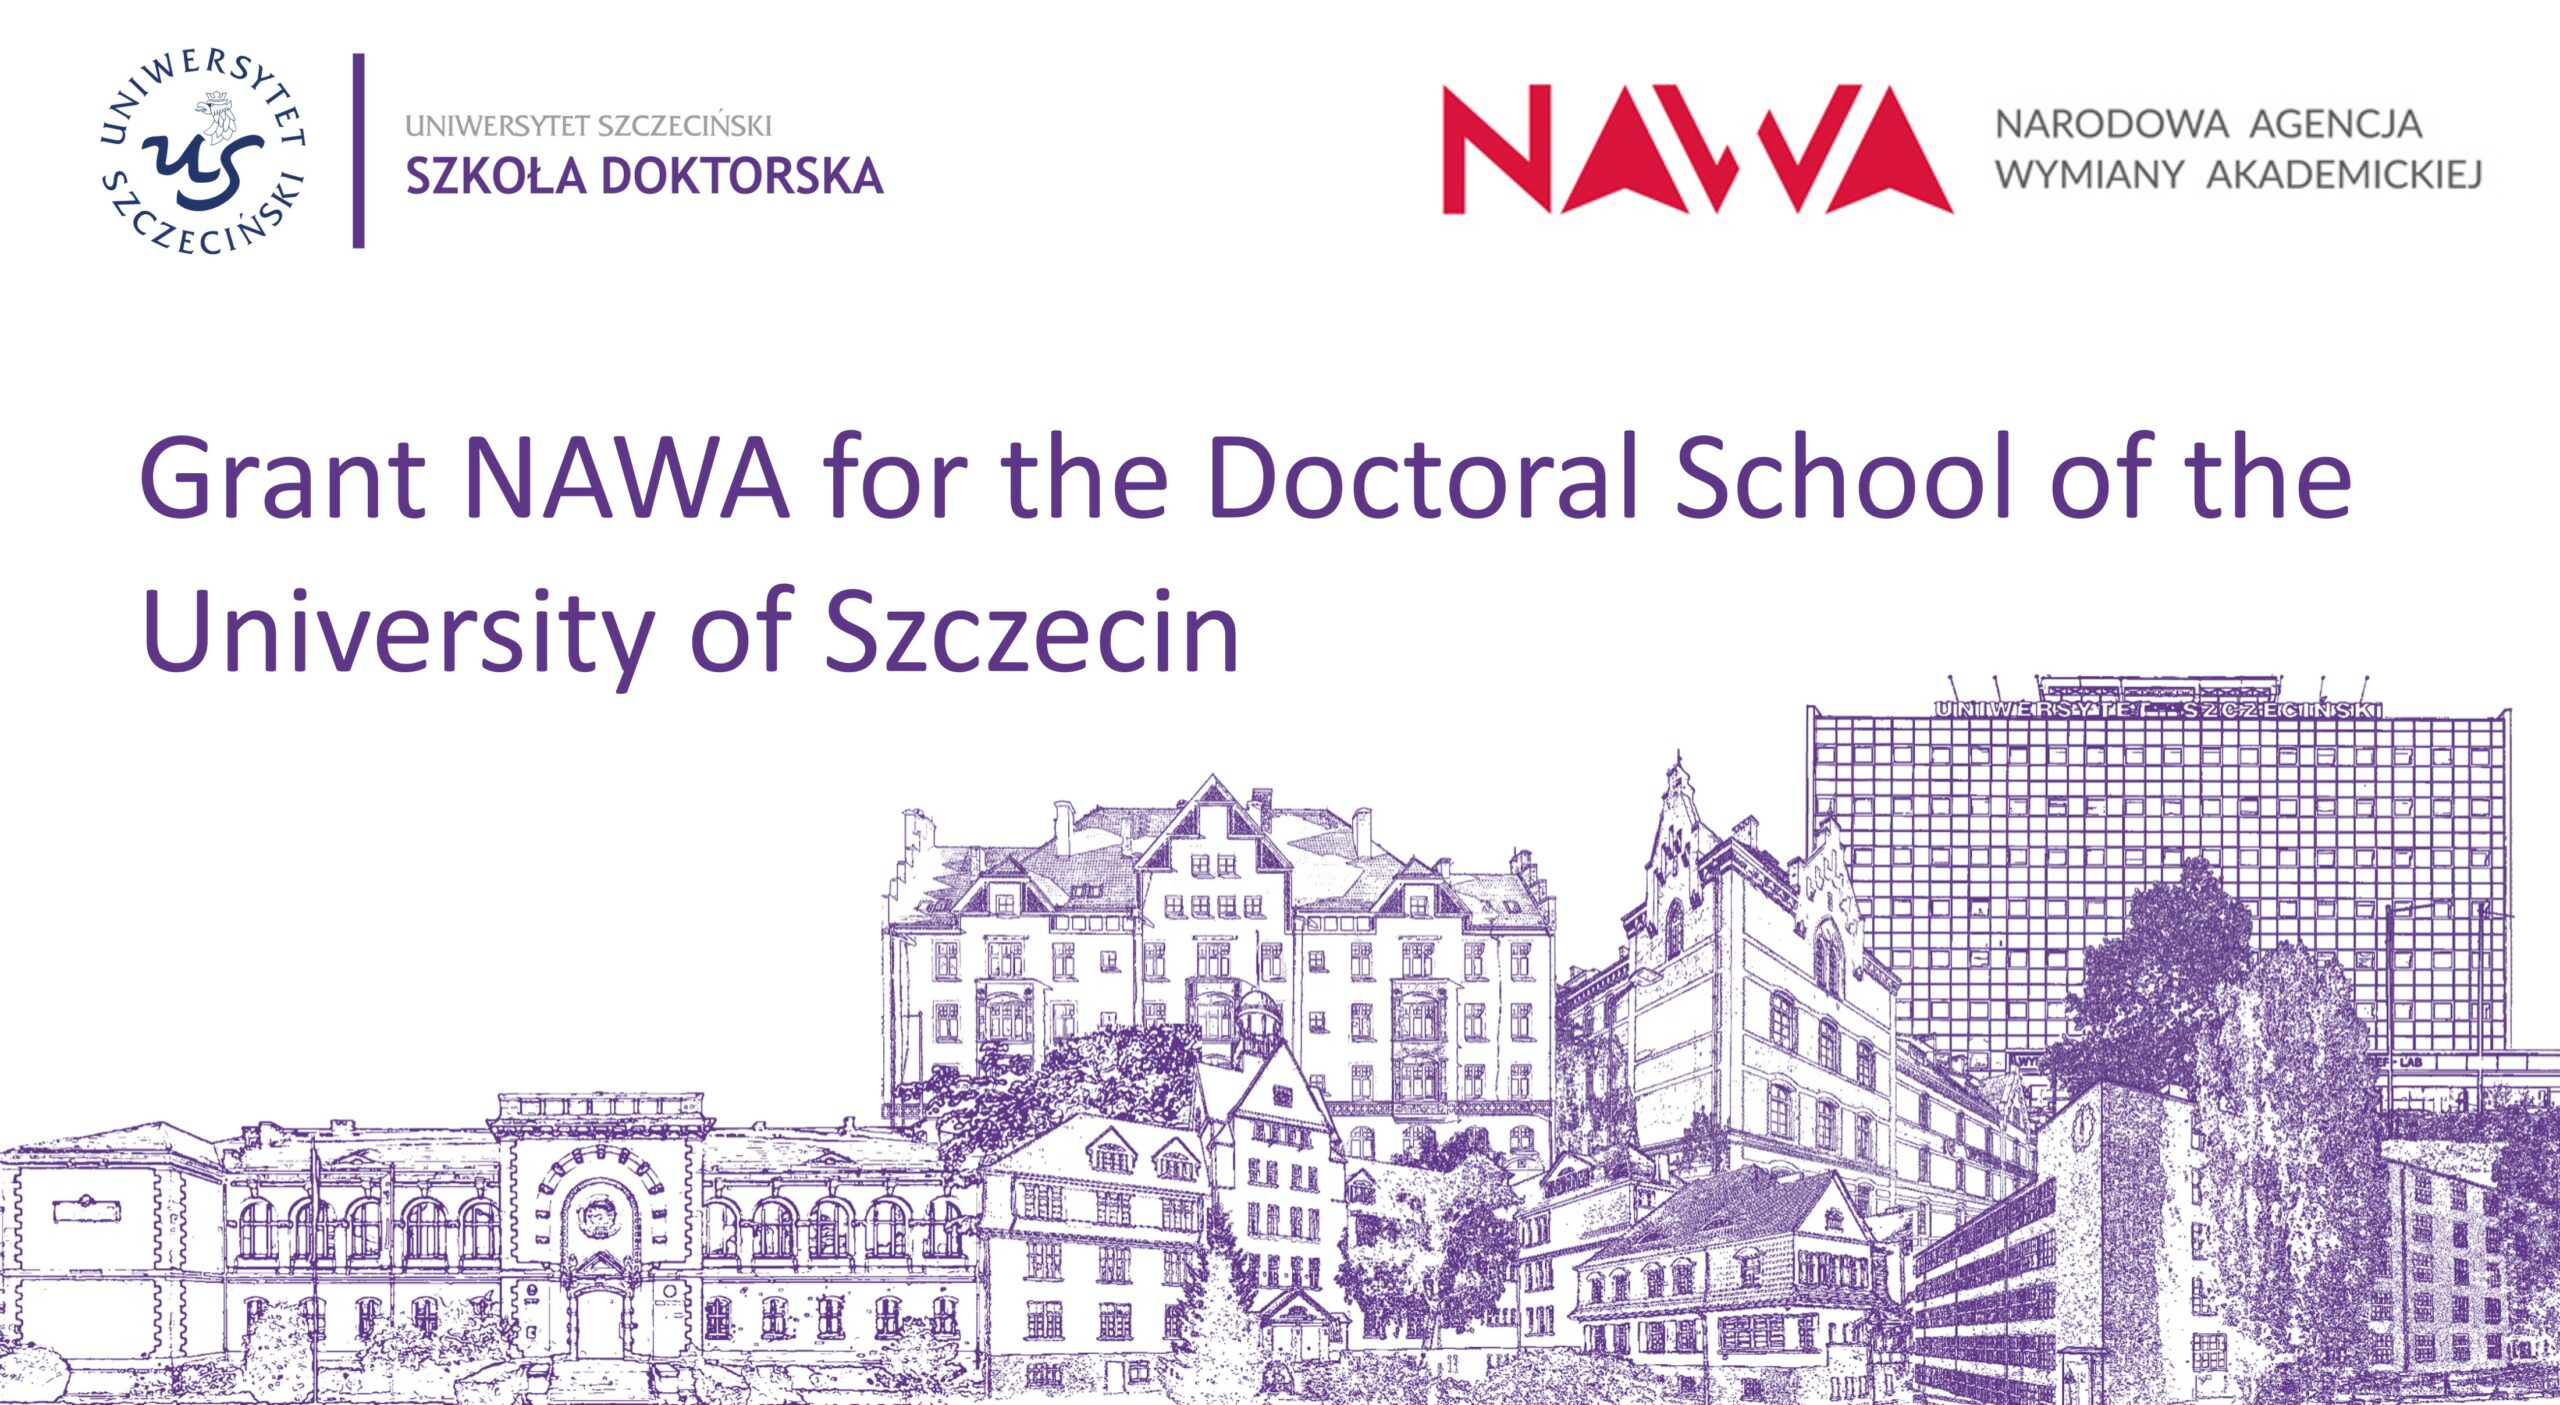 Grant NAWA for the Doctoral School of the University of Szczecin